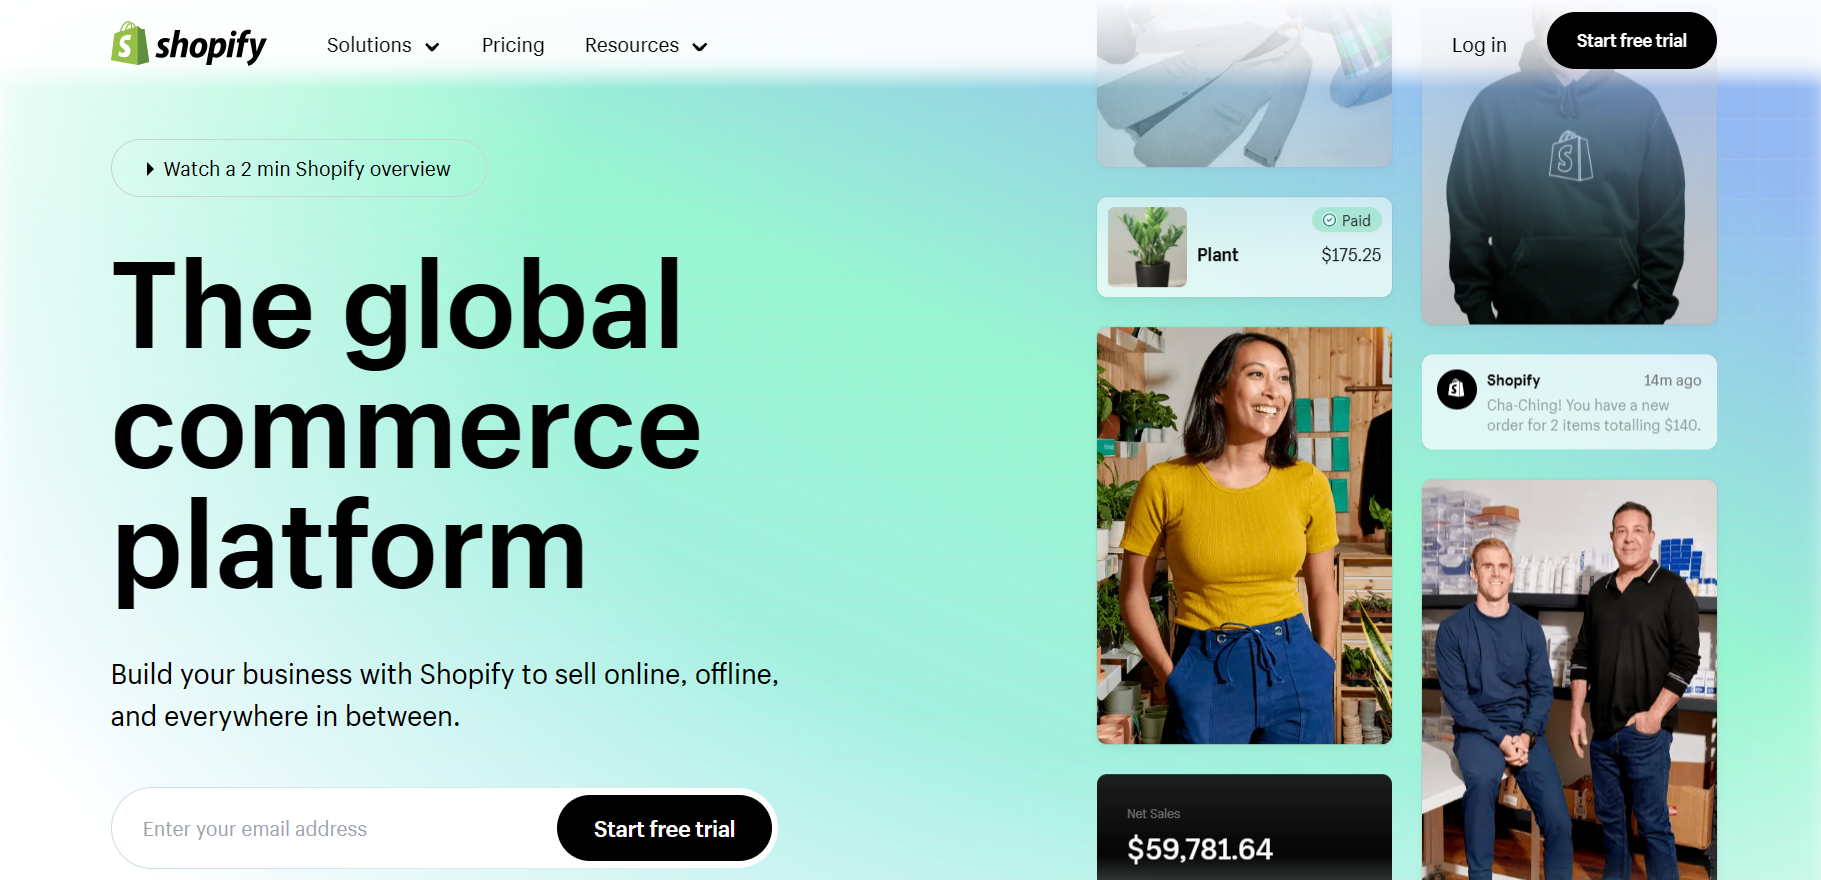 Shopify Features: A Comprehensive Guide to the Tools and Capabilities of the Ecommerce Platform.